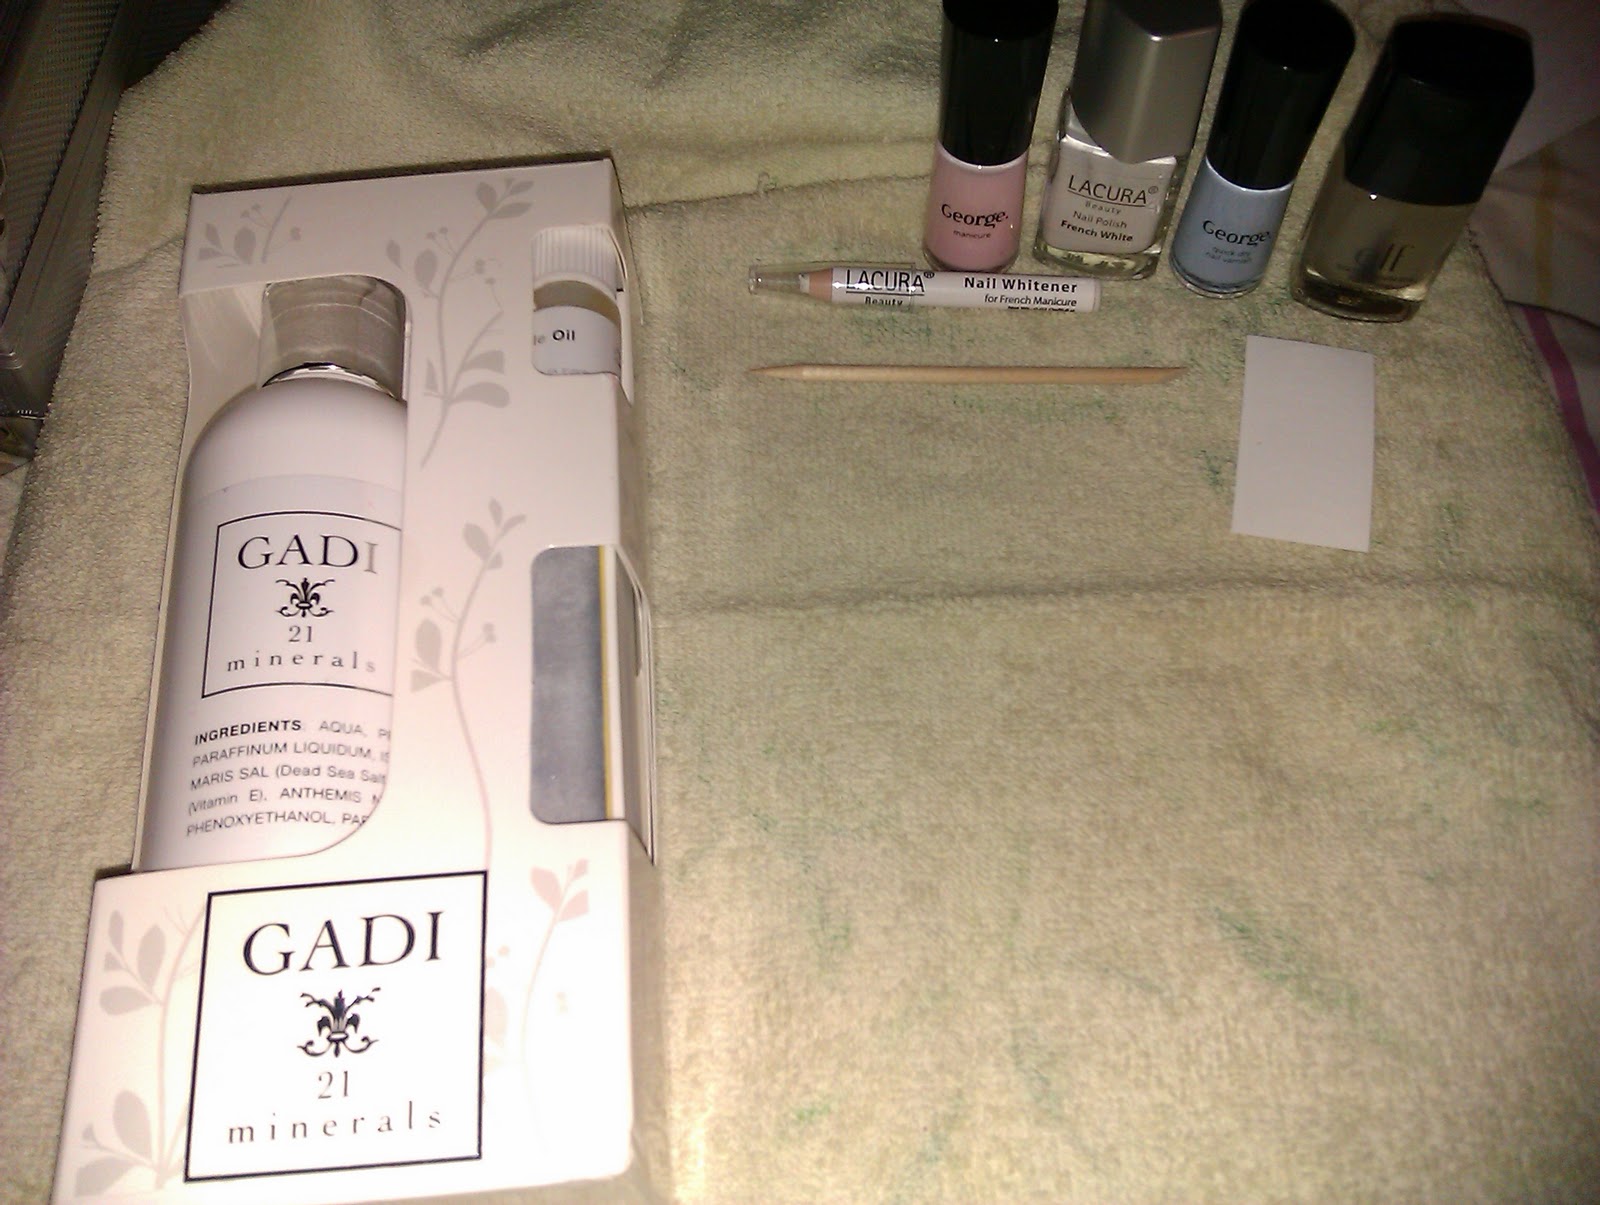 Here is everything I used - Gadi 21 Minerals nail buffer, moisturiser and